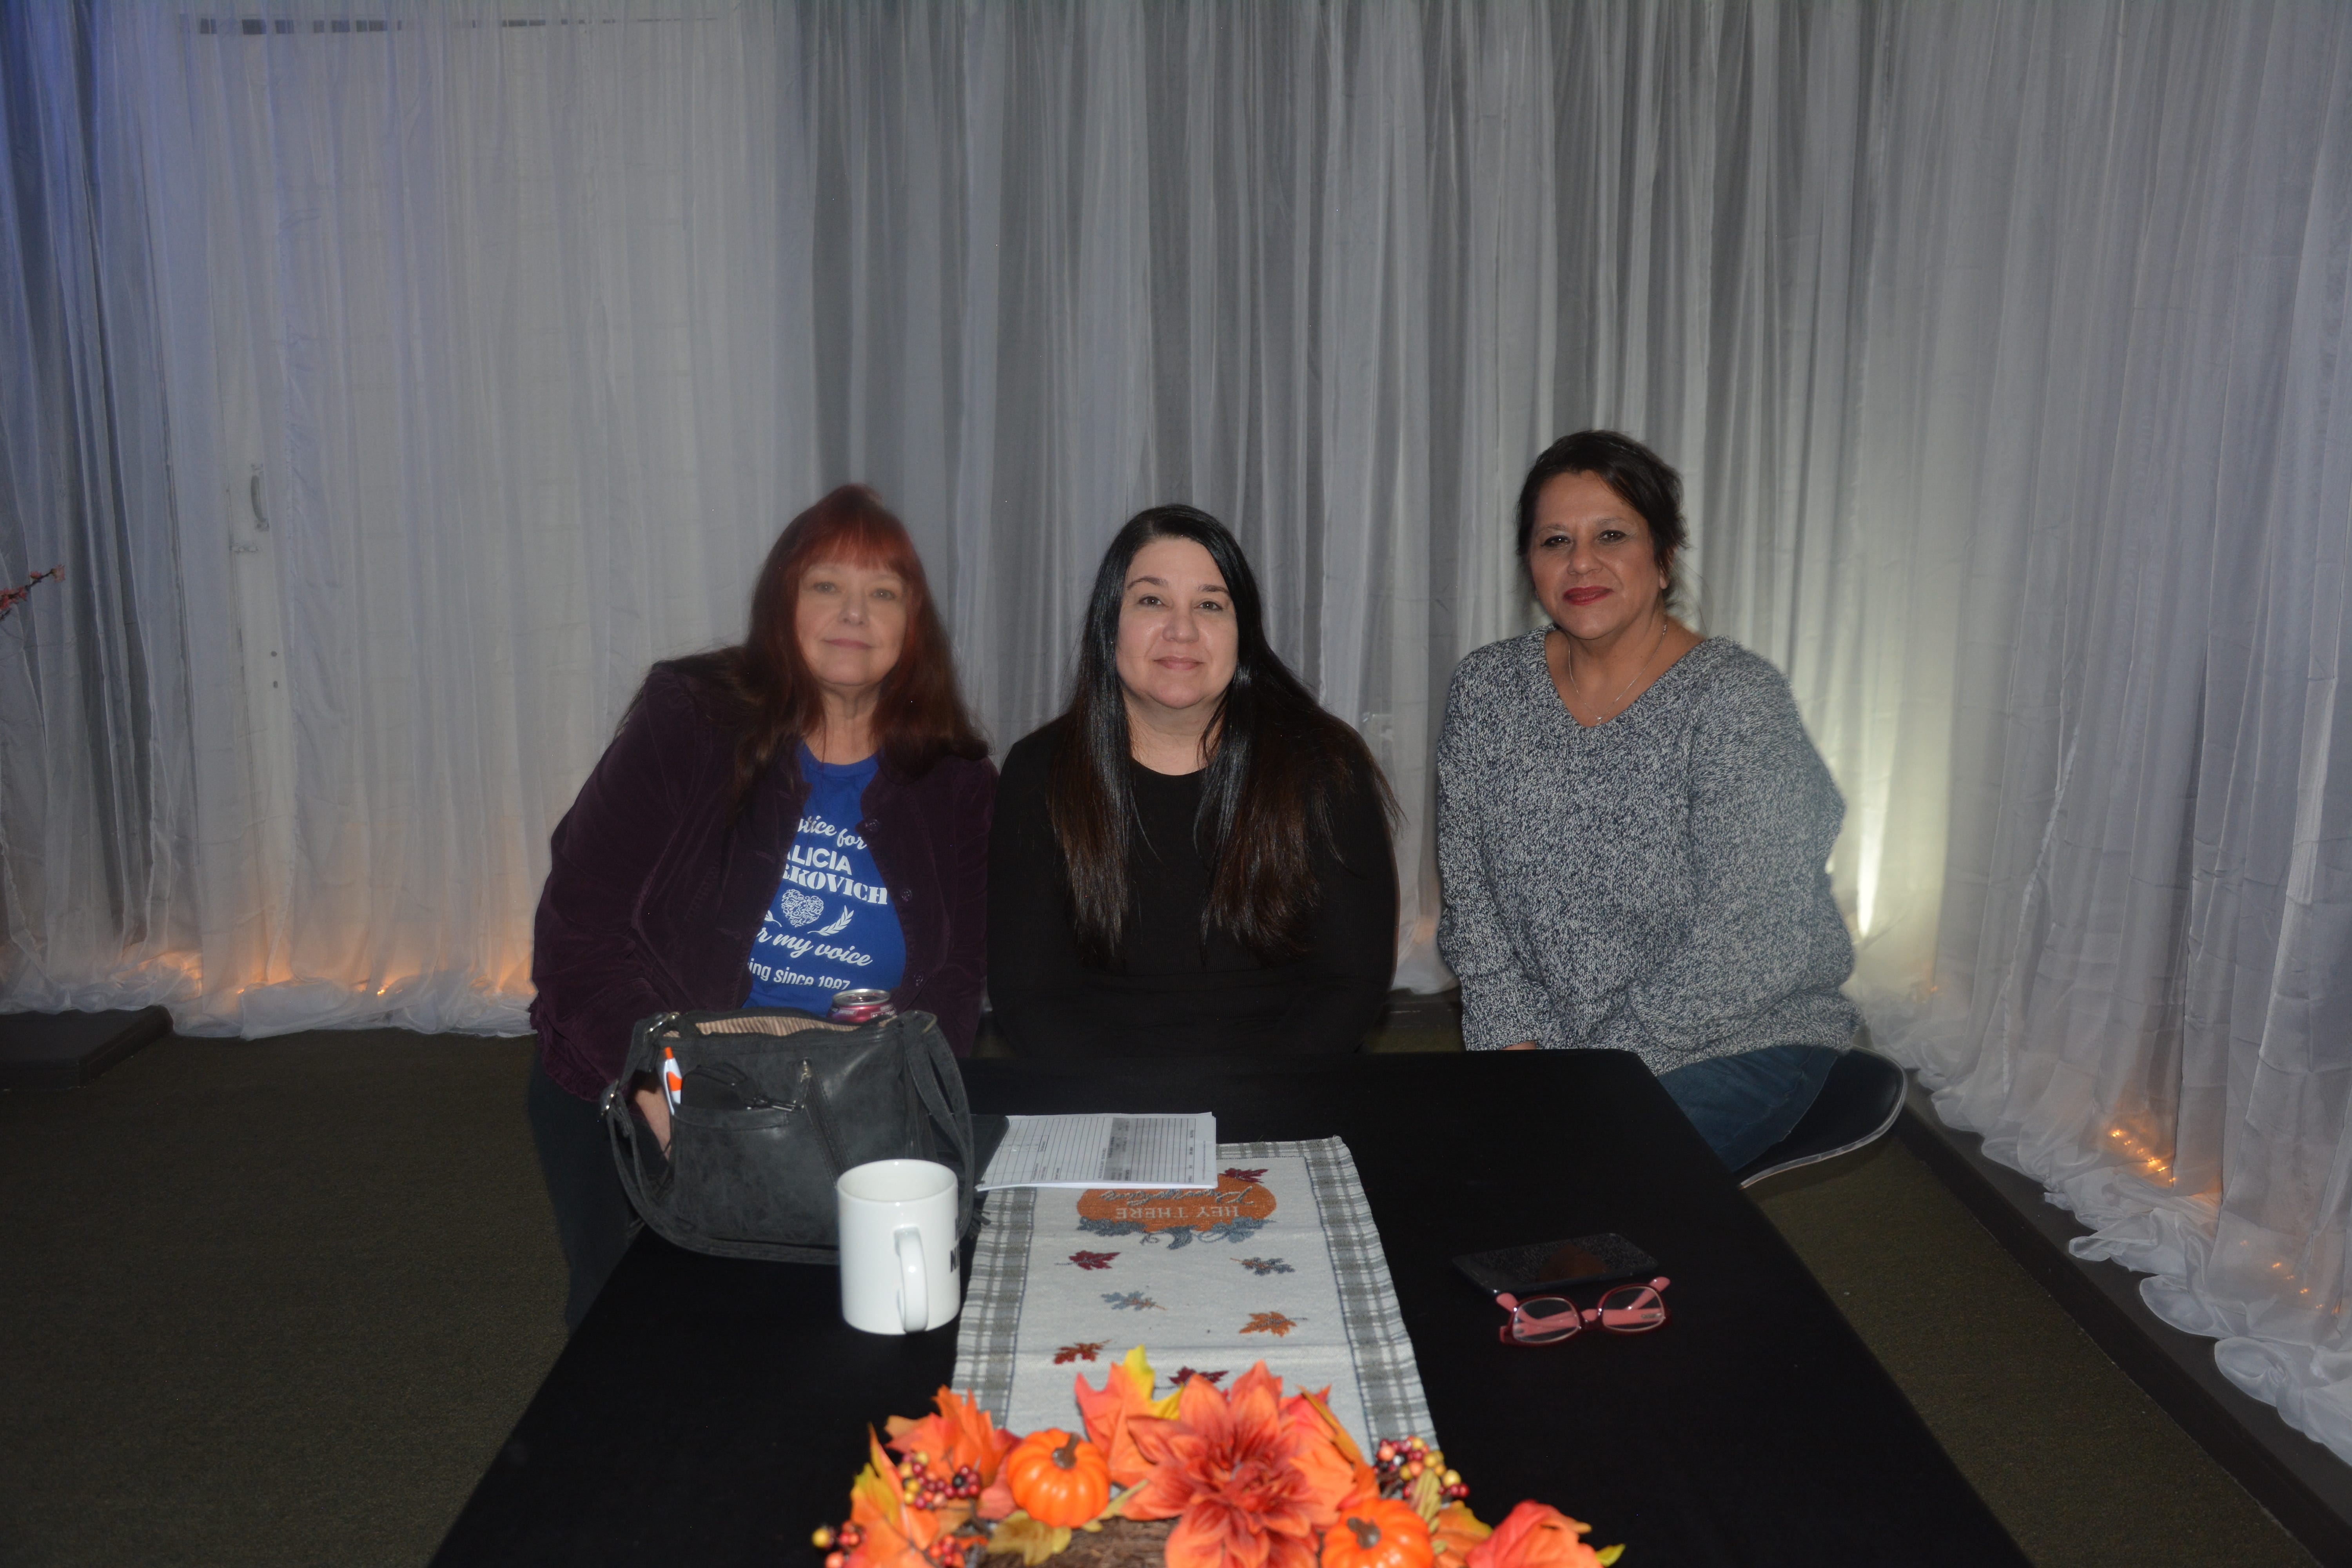 From left: Marcie Vitko, the mother of Alicia Markovich, sits with friends Leah Altemus and Chrissie Boyer at Black Raven Metaphysical Shoppe & Reiki Salon in Windber.